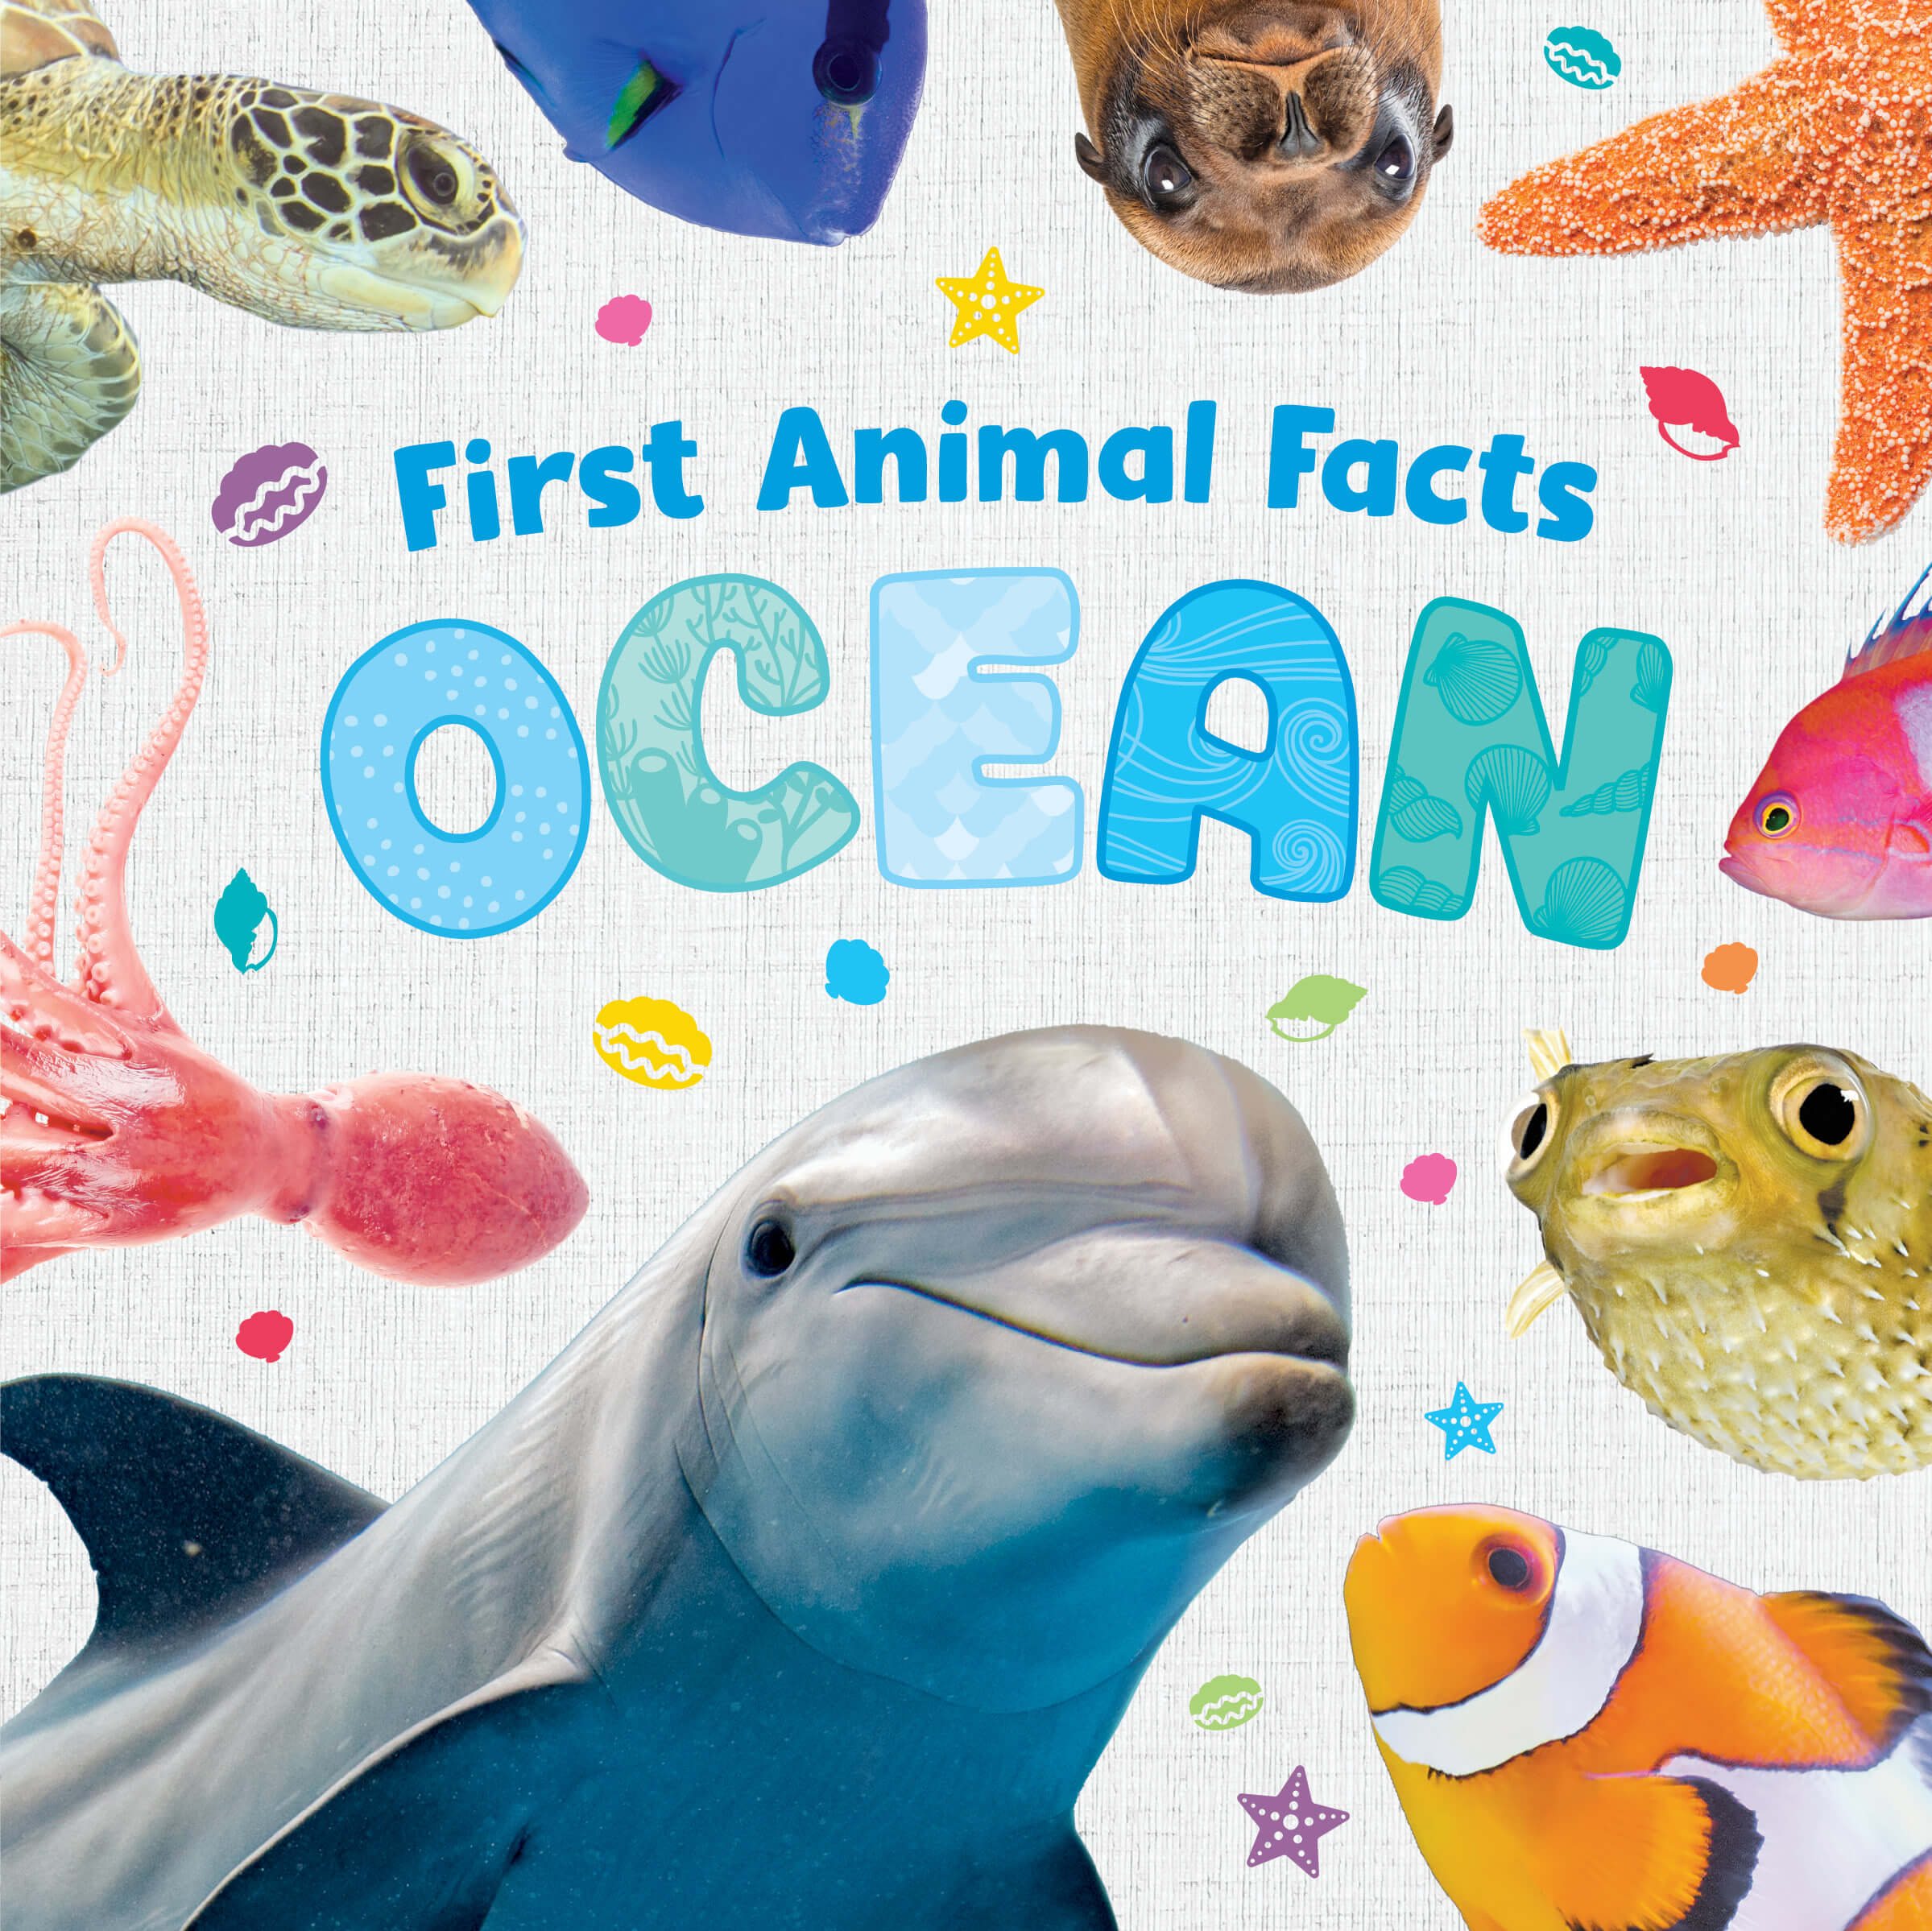 First Animal Facts: Ocean